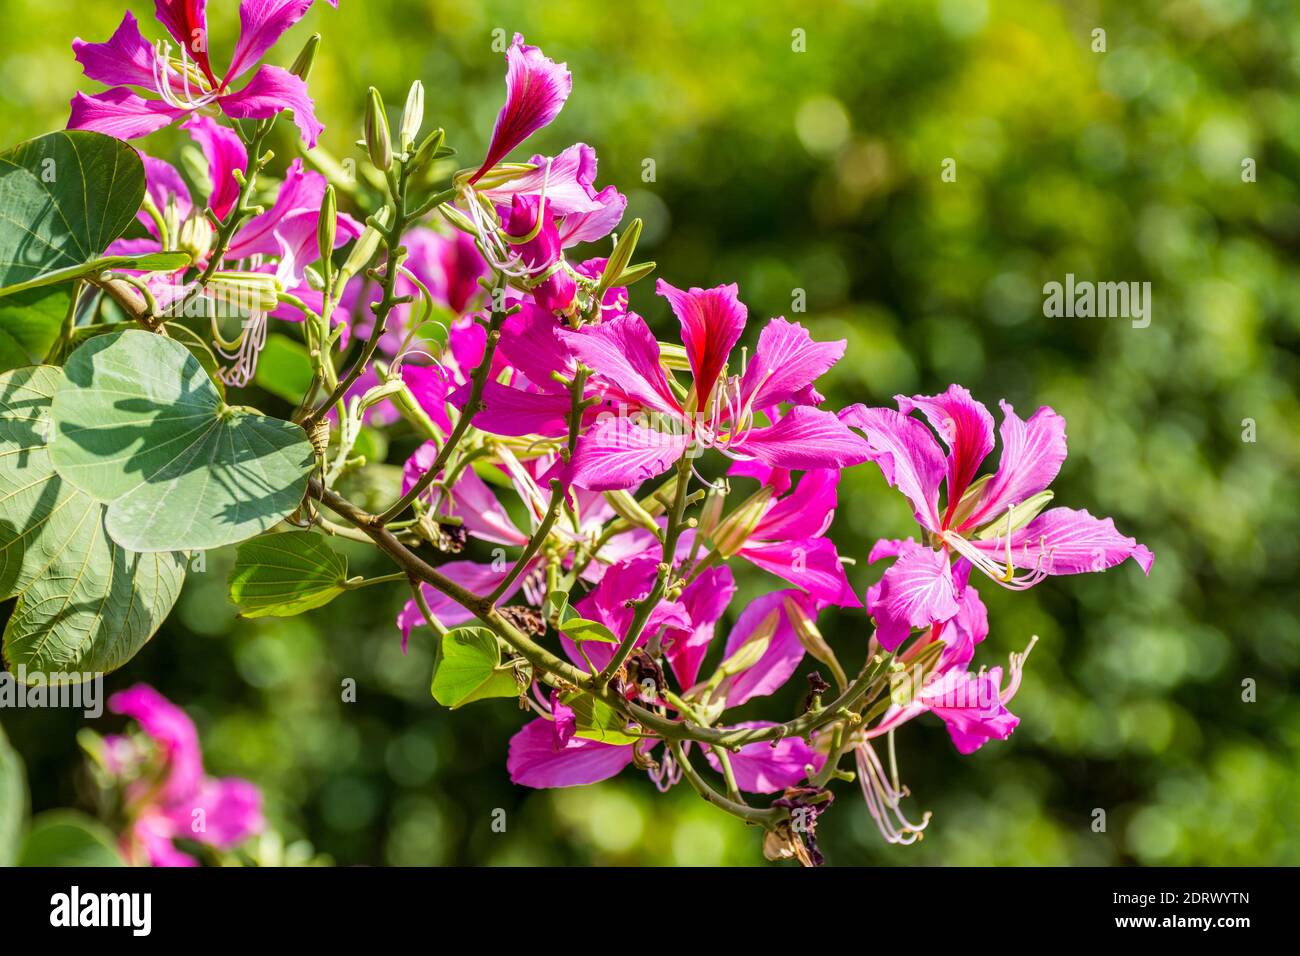 Pink Bauhinia flower blooming, commonly called the Hong Kong Orchid Tree, which is cultivated at the Hong Kong Botanic Gardens and widely planted in H Stock Photo